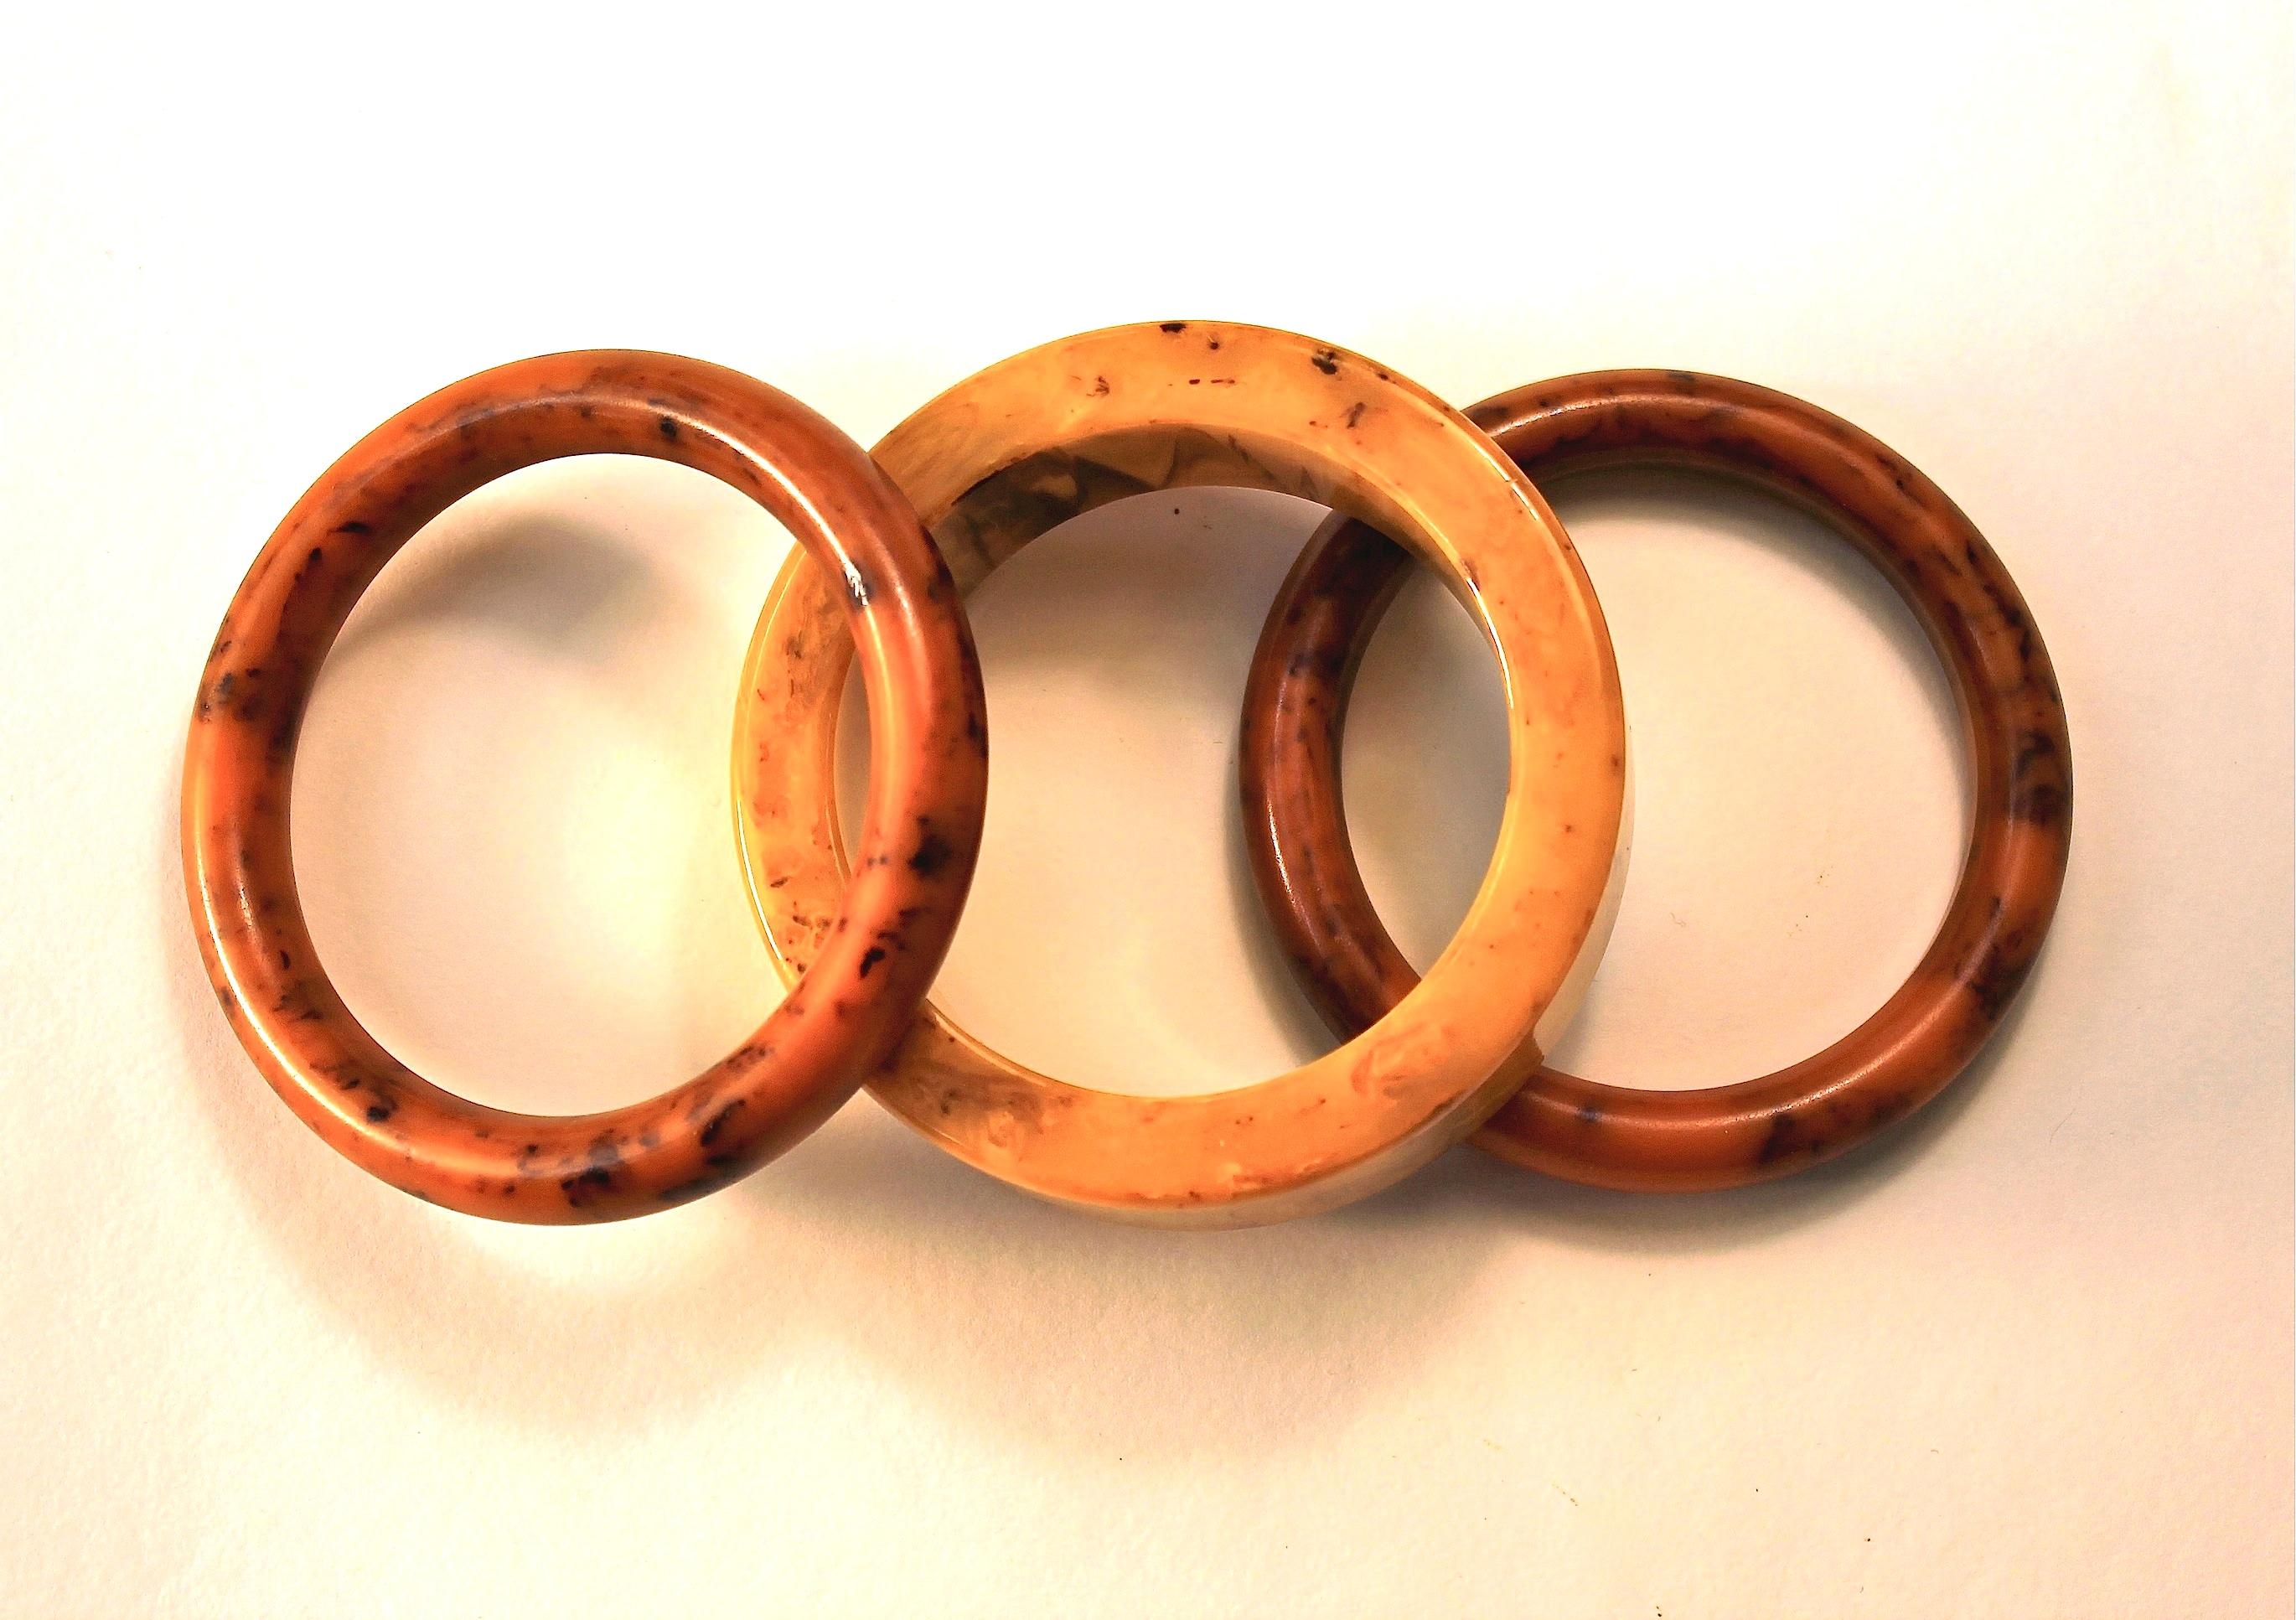 Bakelite Cuff Bangles in Butterscotch and Cinnabar In Good Condition For Sale In New York, NY